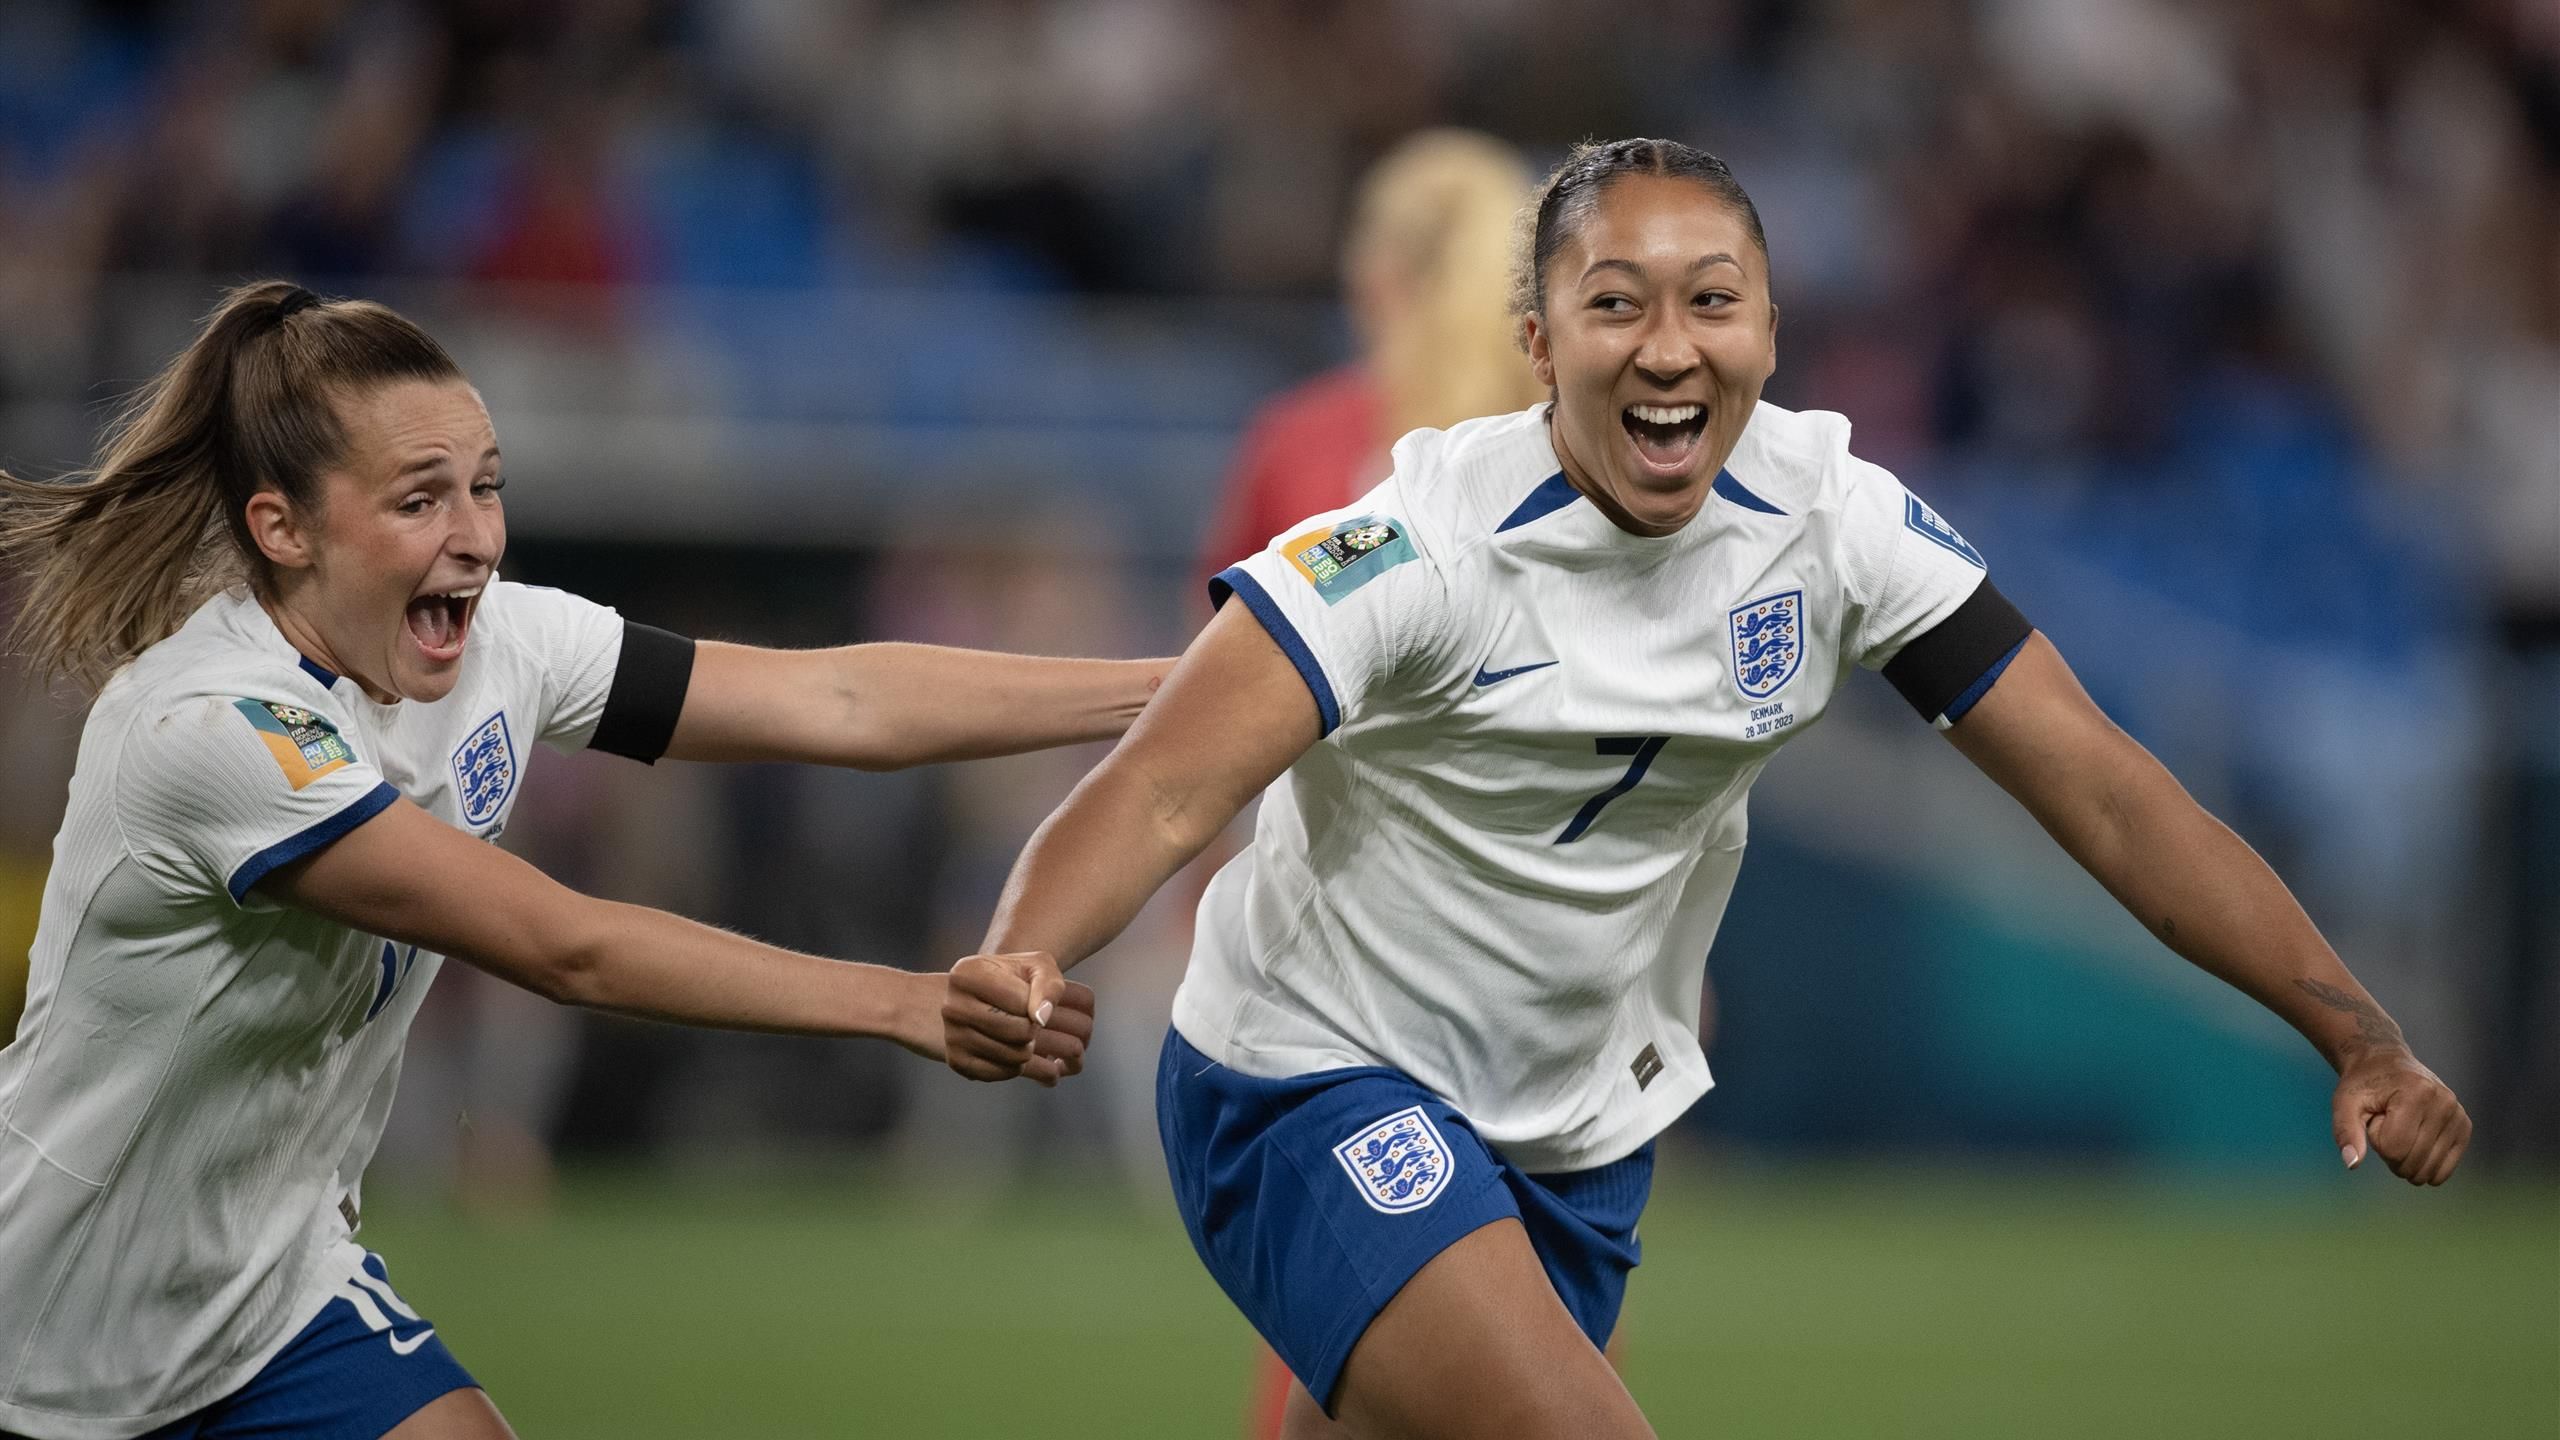 England v China How to watch the Womens World Cup match, TV channel, live stream details, kick-off time